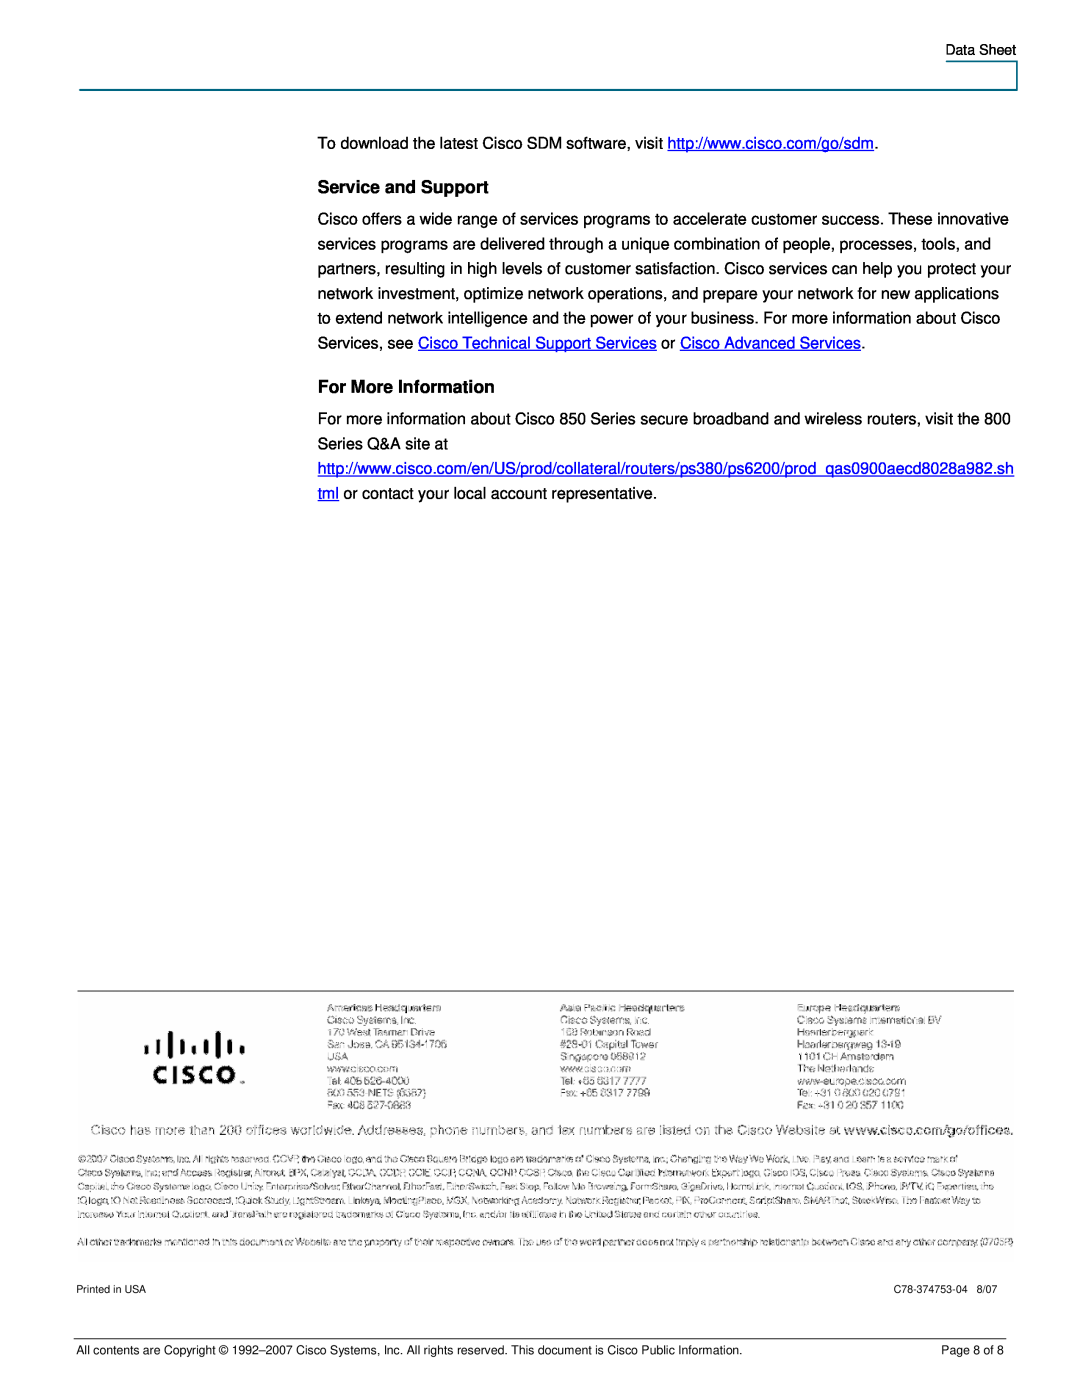 Cisco Systems CISCO851WGEK9RF manual Service and Support, For More Information, C78-374753-04 8/07, Page 8 of 